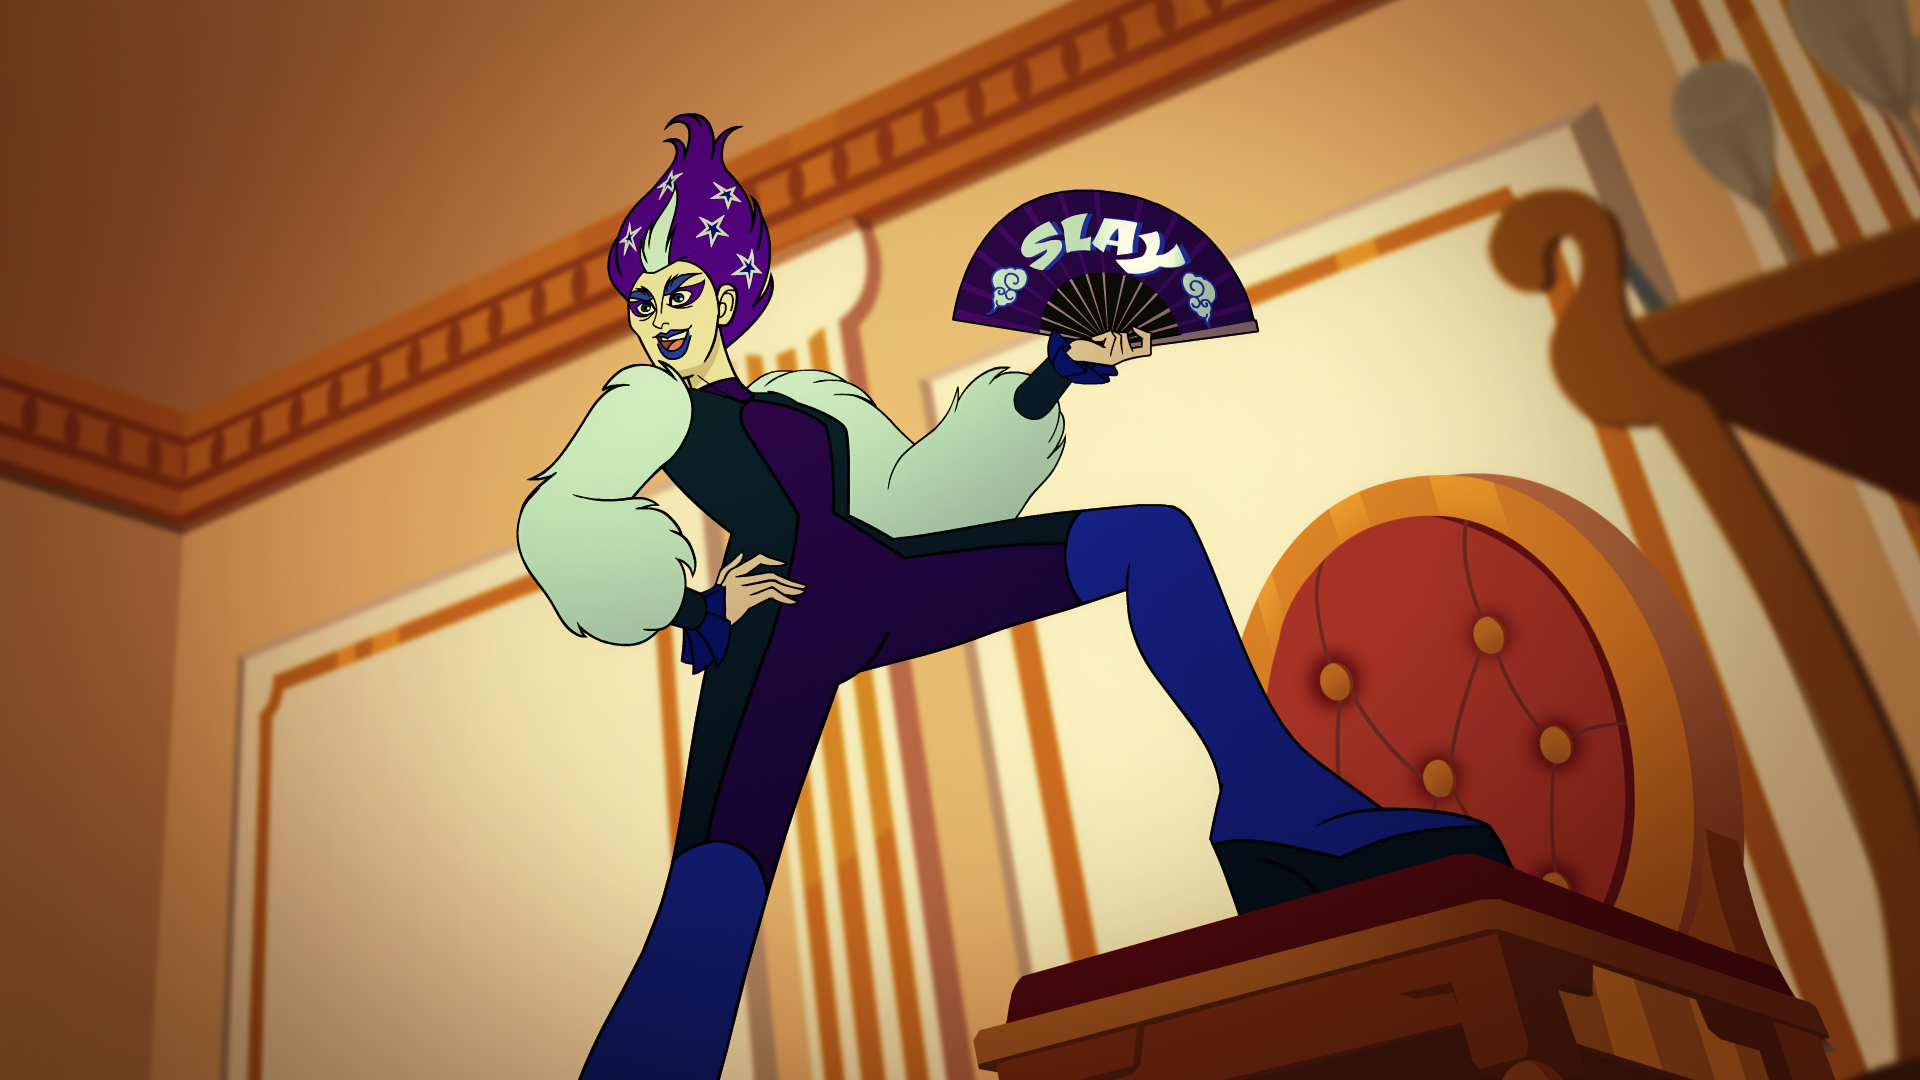 Twink, a drag-queen character from Netflix’s Q-Force, poses on a table, in a purple, star-filled bouffant and holding up a fan that says “SLAY”